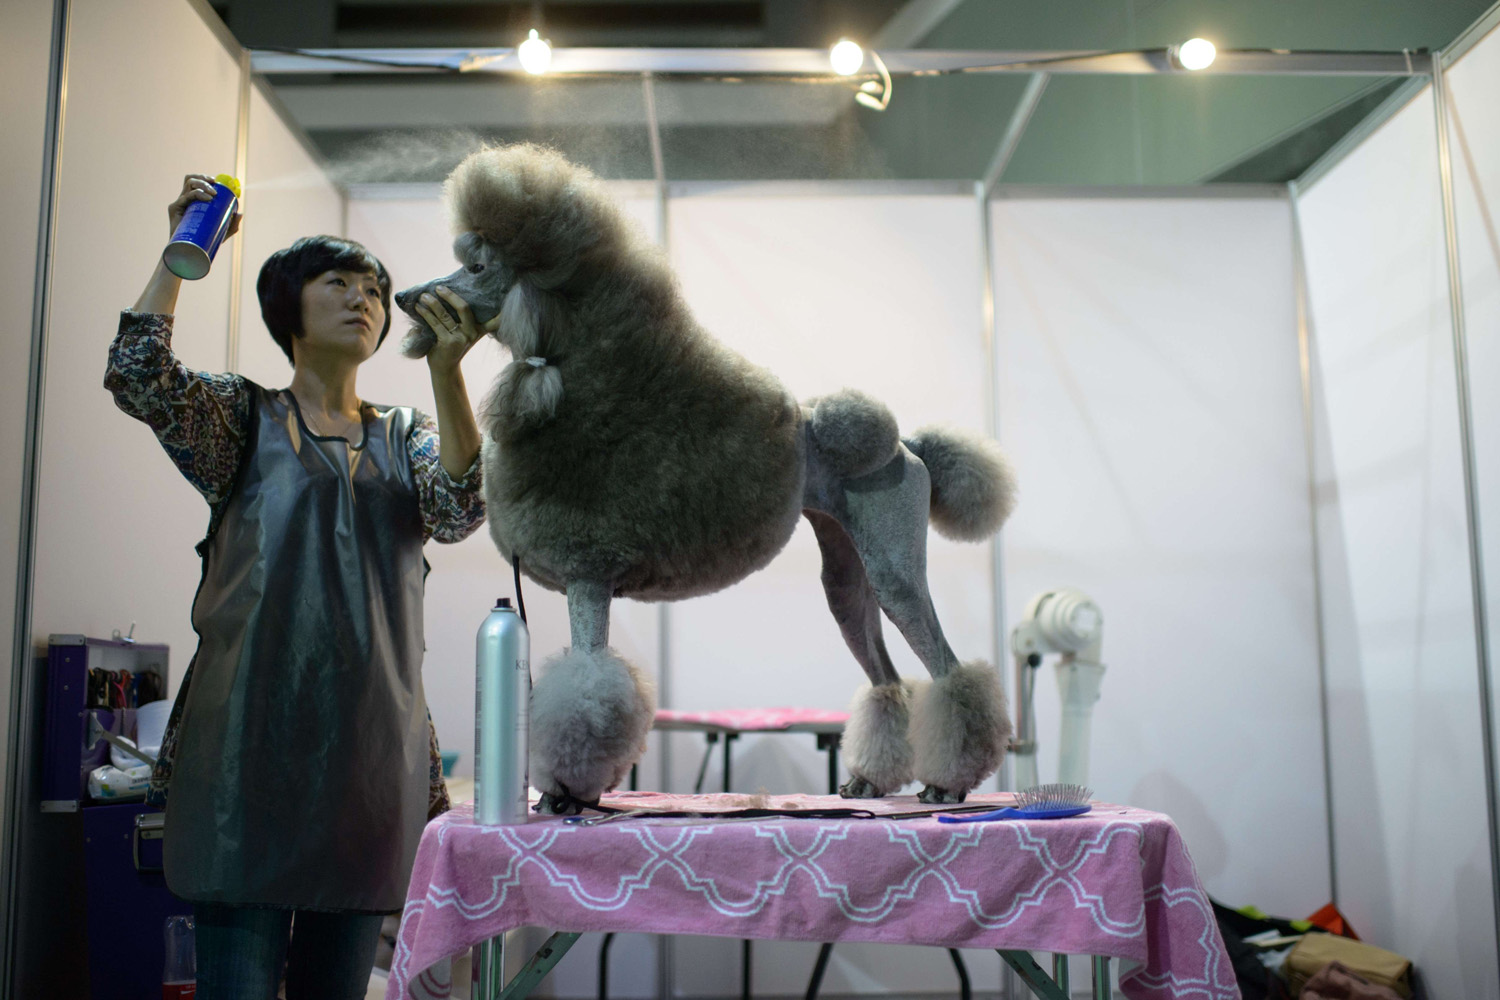 A dog owner sprays hairspray on her poodle backstage at a dog show in Seoul on Aug. 30, 2014.